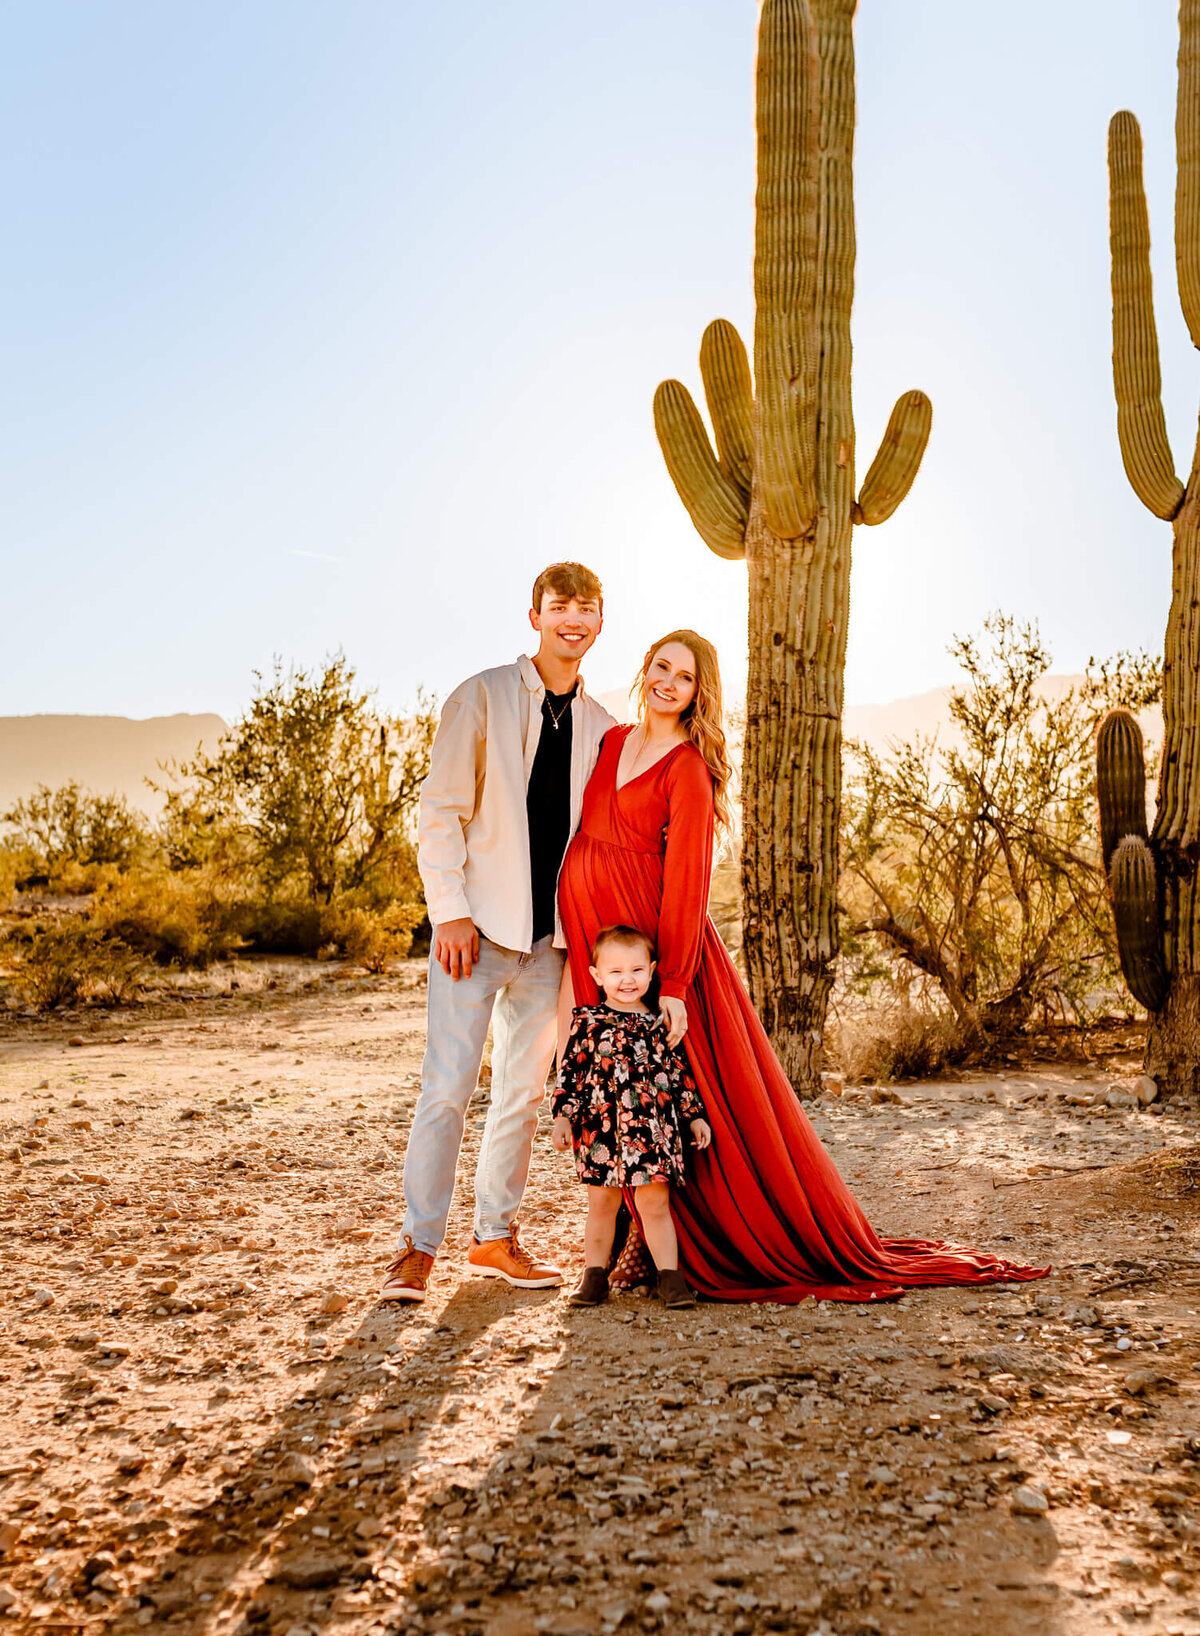 rust maternity dress in photographer client worn by AZ mom